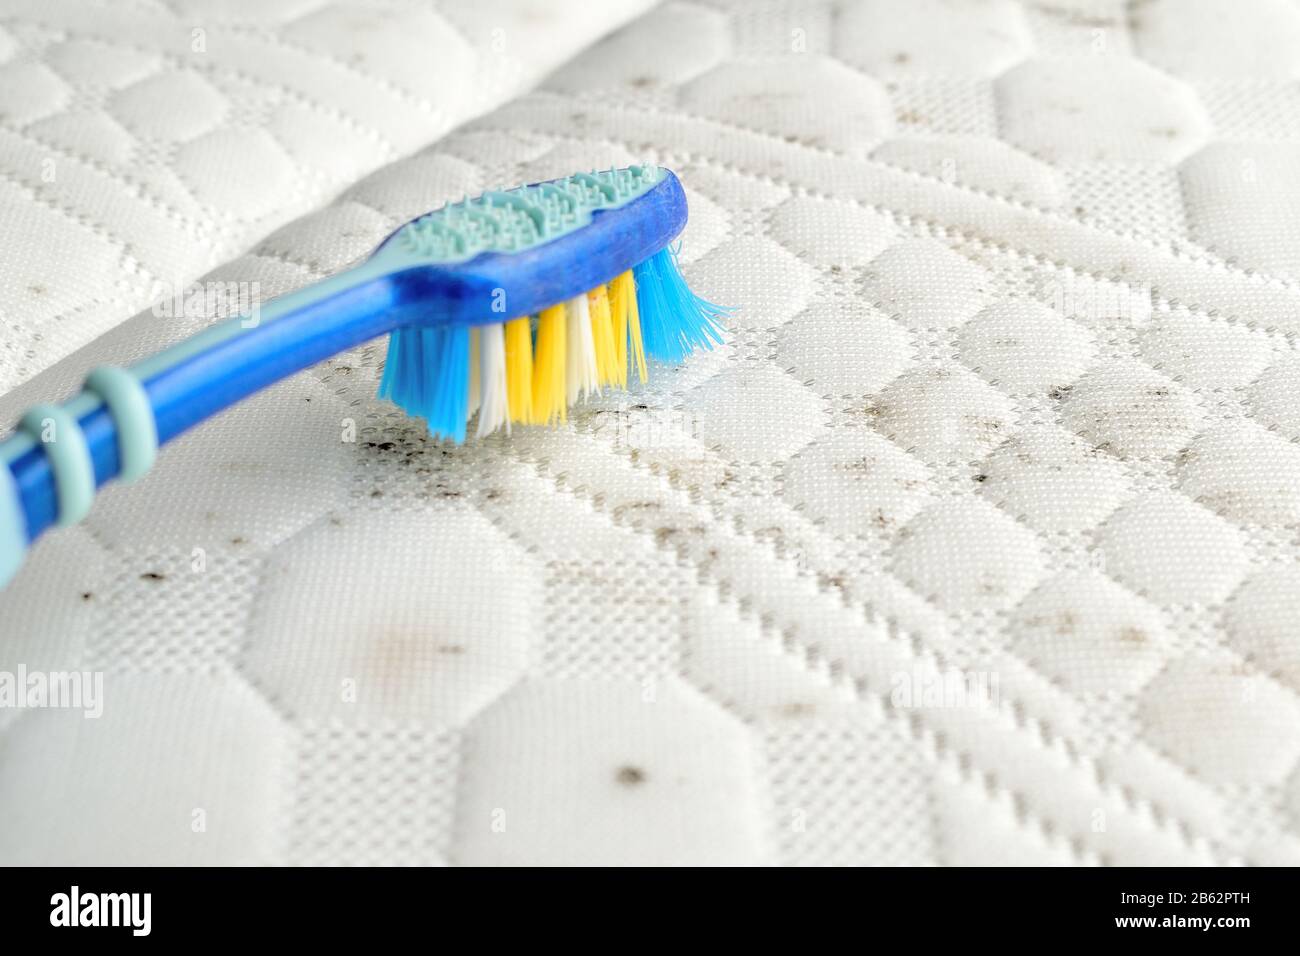 Removing fungus stains from the mattress`s surface with a brush. Stock Photo